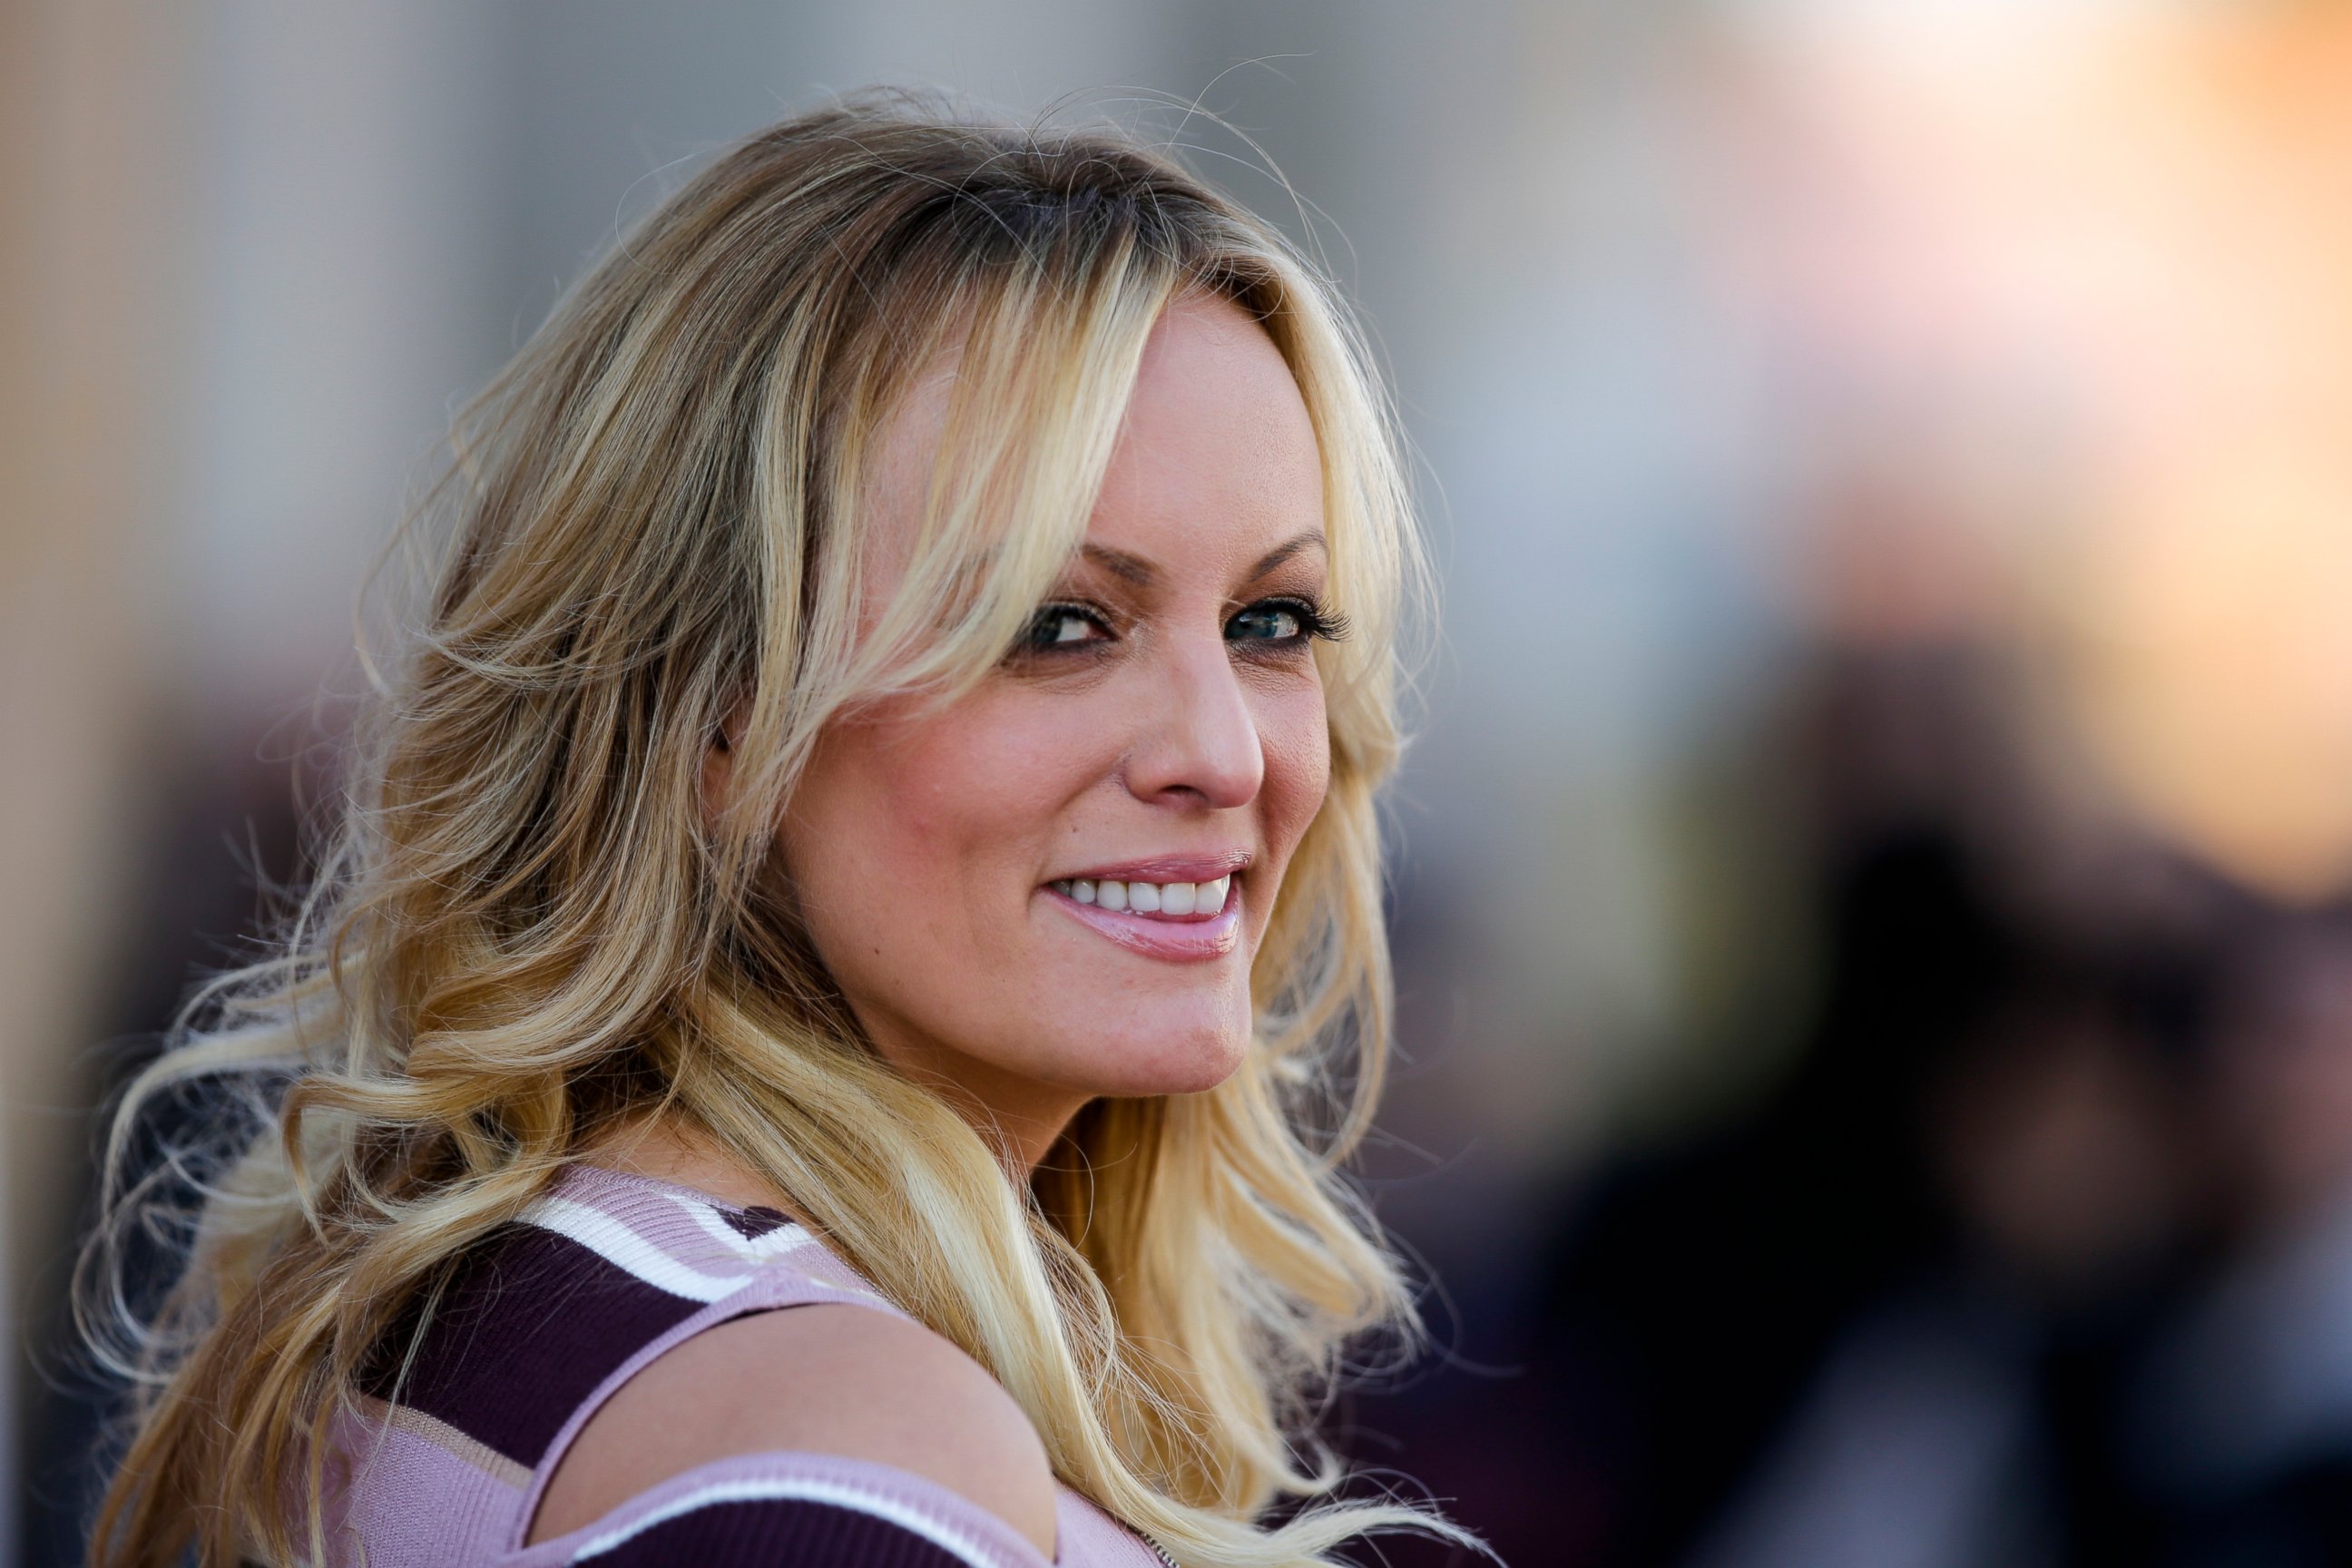 PHOTO: In this Oct. 11, 2018, file photo, adult film actress Stormy Daniels attends the opening of the adult entertainment fair 'Venus' in Berlin, Germany.